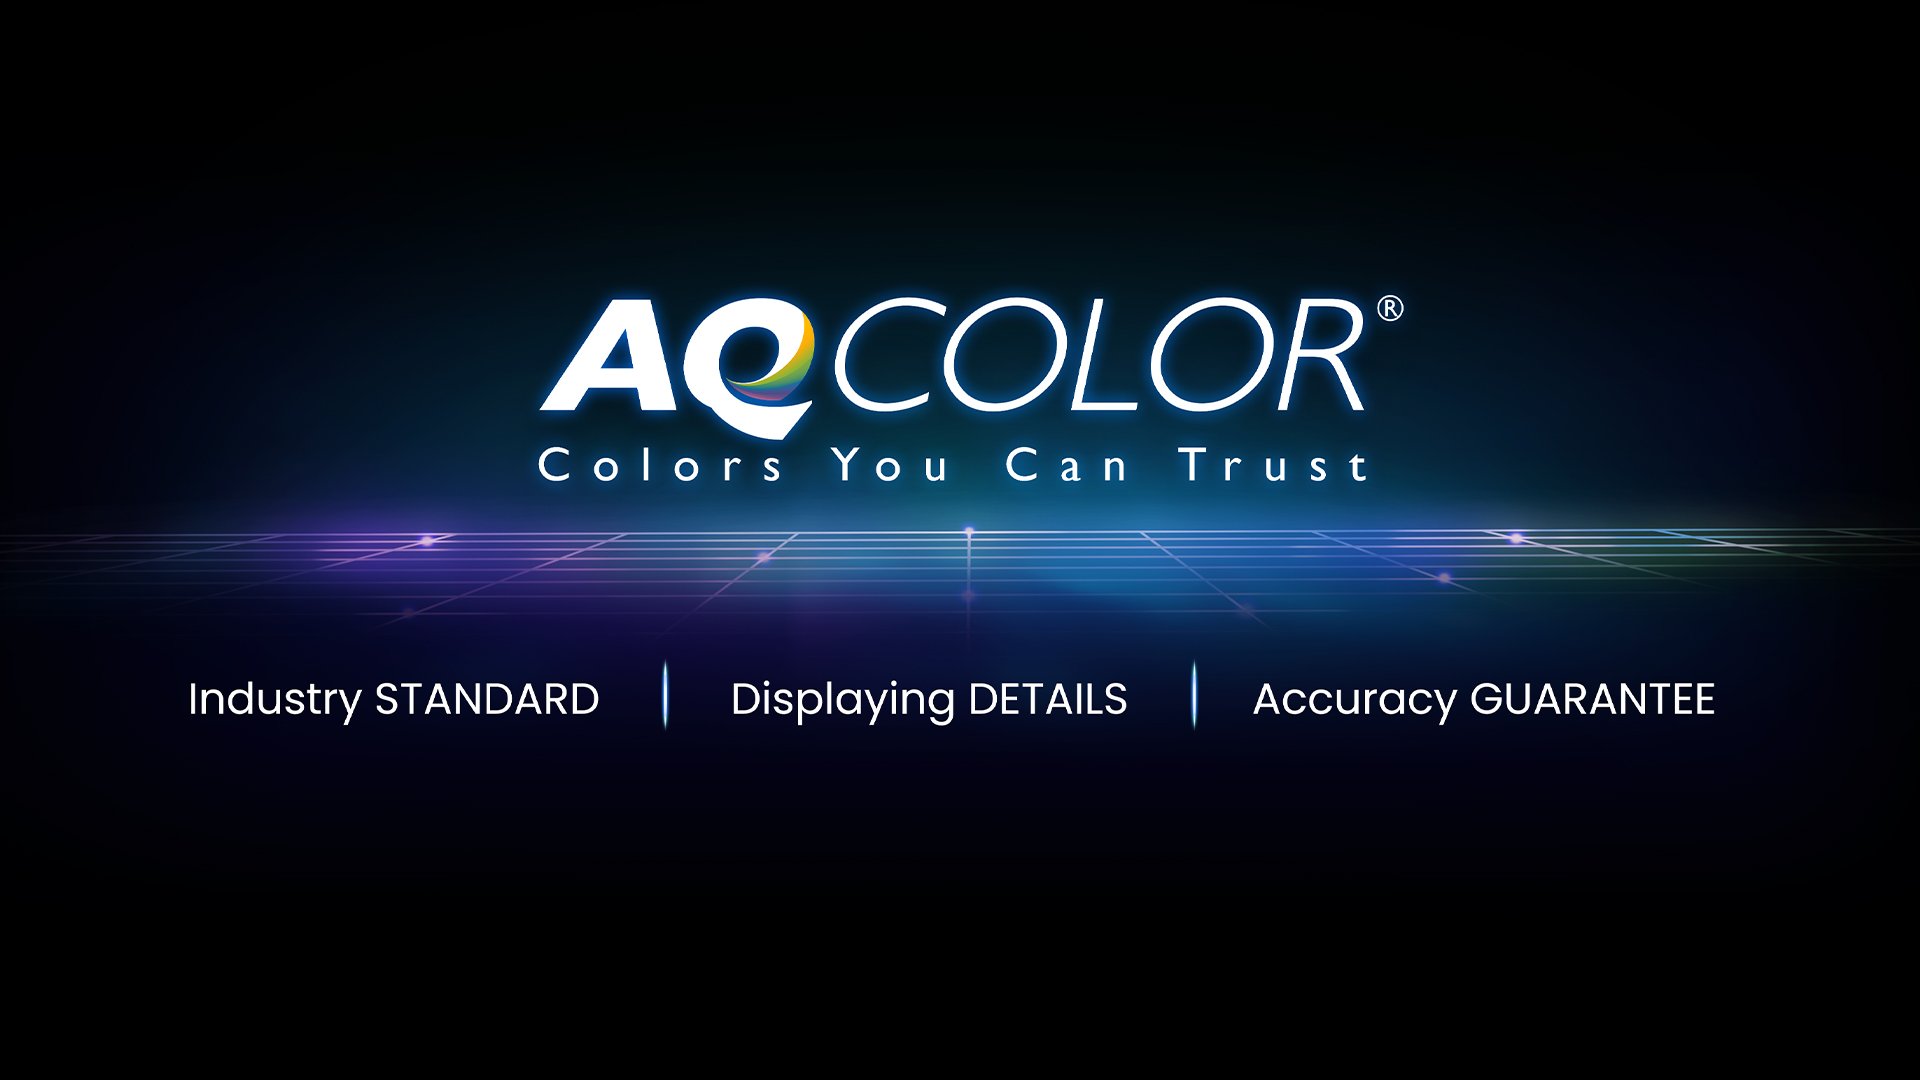 BenQ AQCOLOR technology delivers 'Accurate Reproduction.' This translates to the display of color precisely as it is intended to appear. With Delta E ≤ 1.5 and BenQ ICCsync, SW272Q offers out-of-the-box and easy-to-reach color accuracy. The 16-bit 3D lookup table (LUT) improves color blending for precise reproduction. 